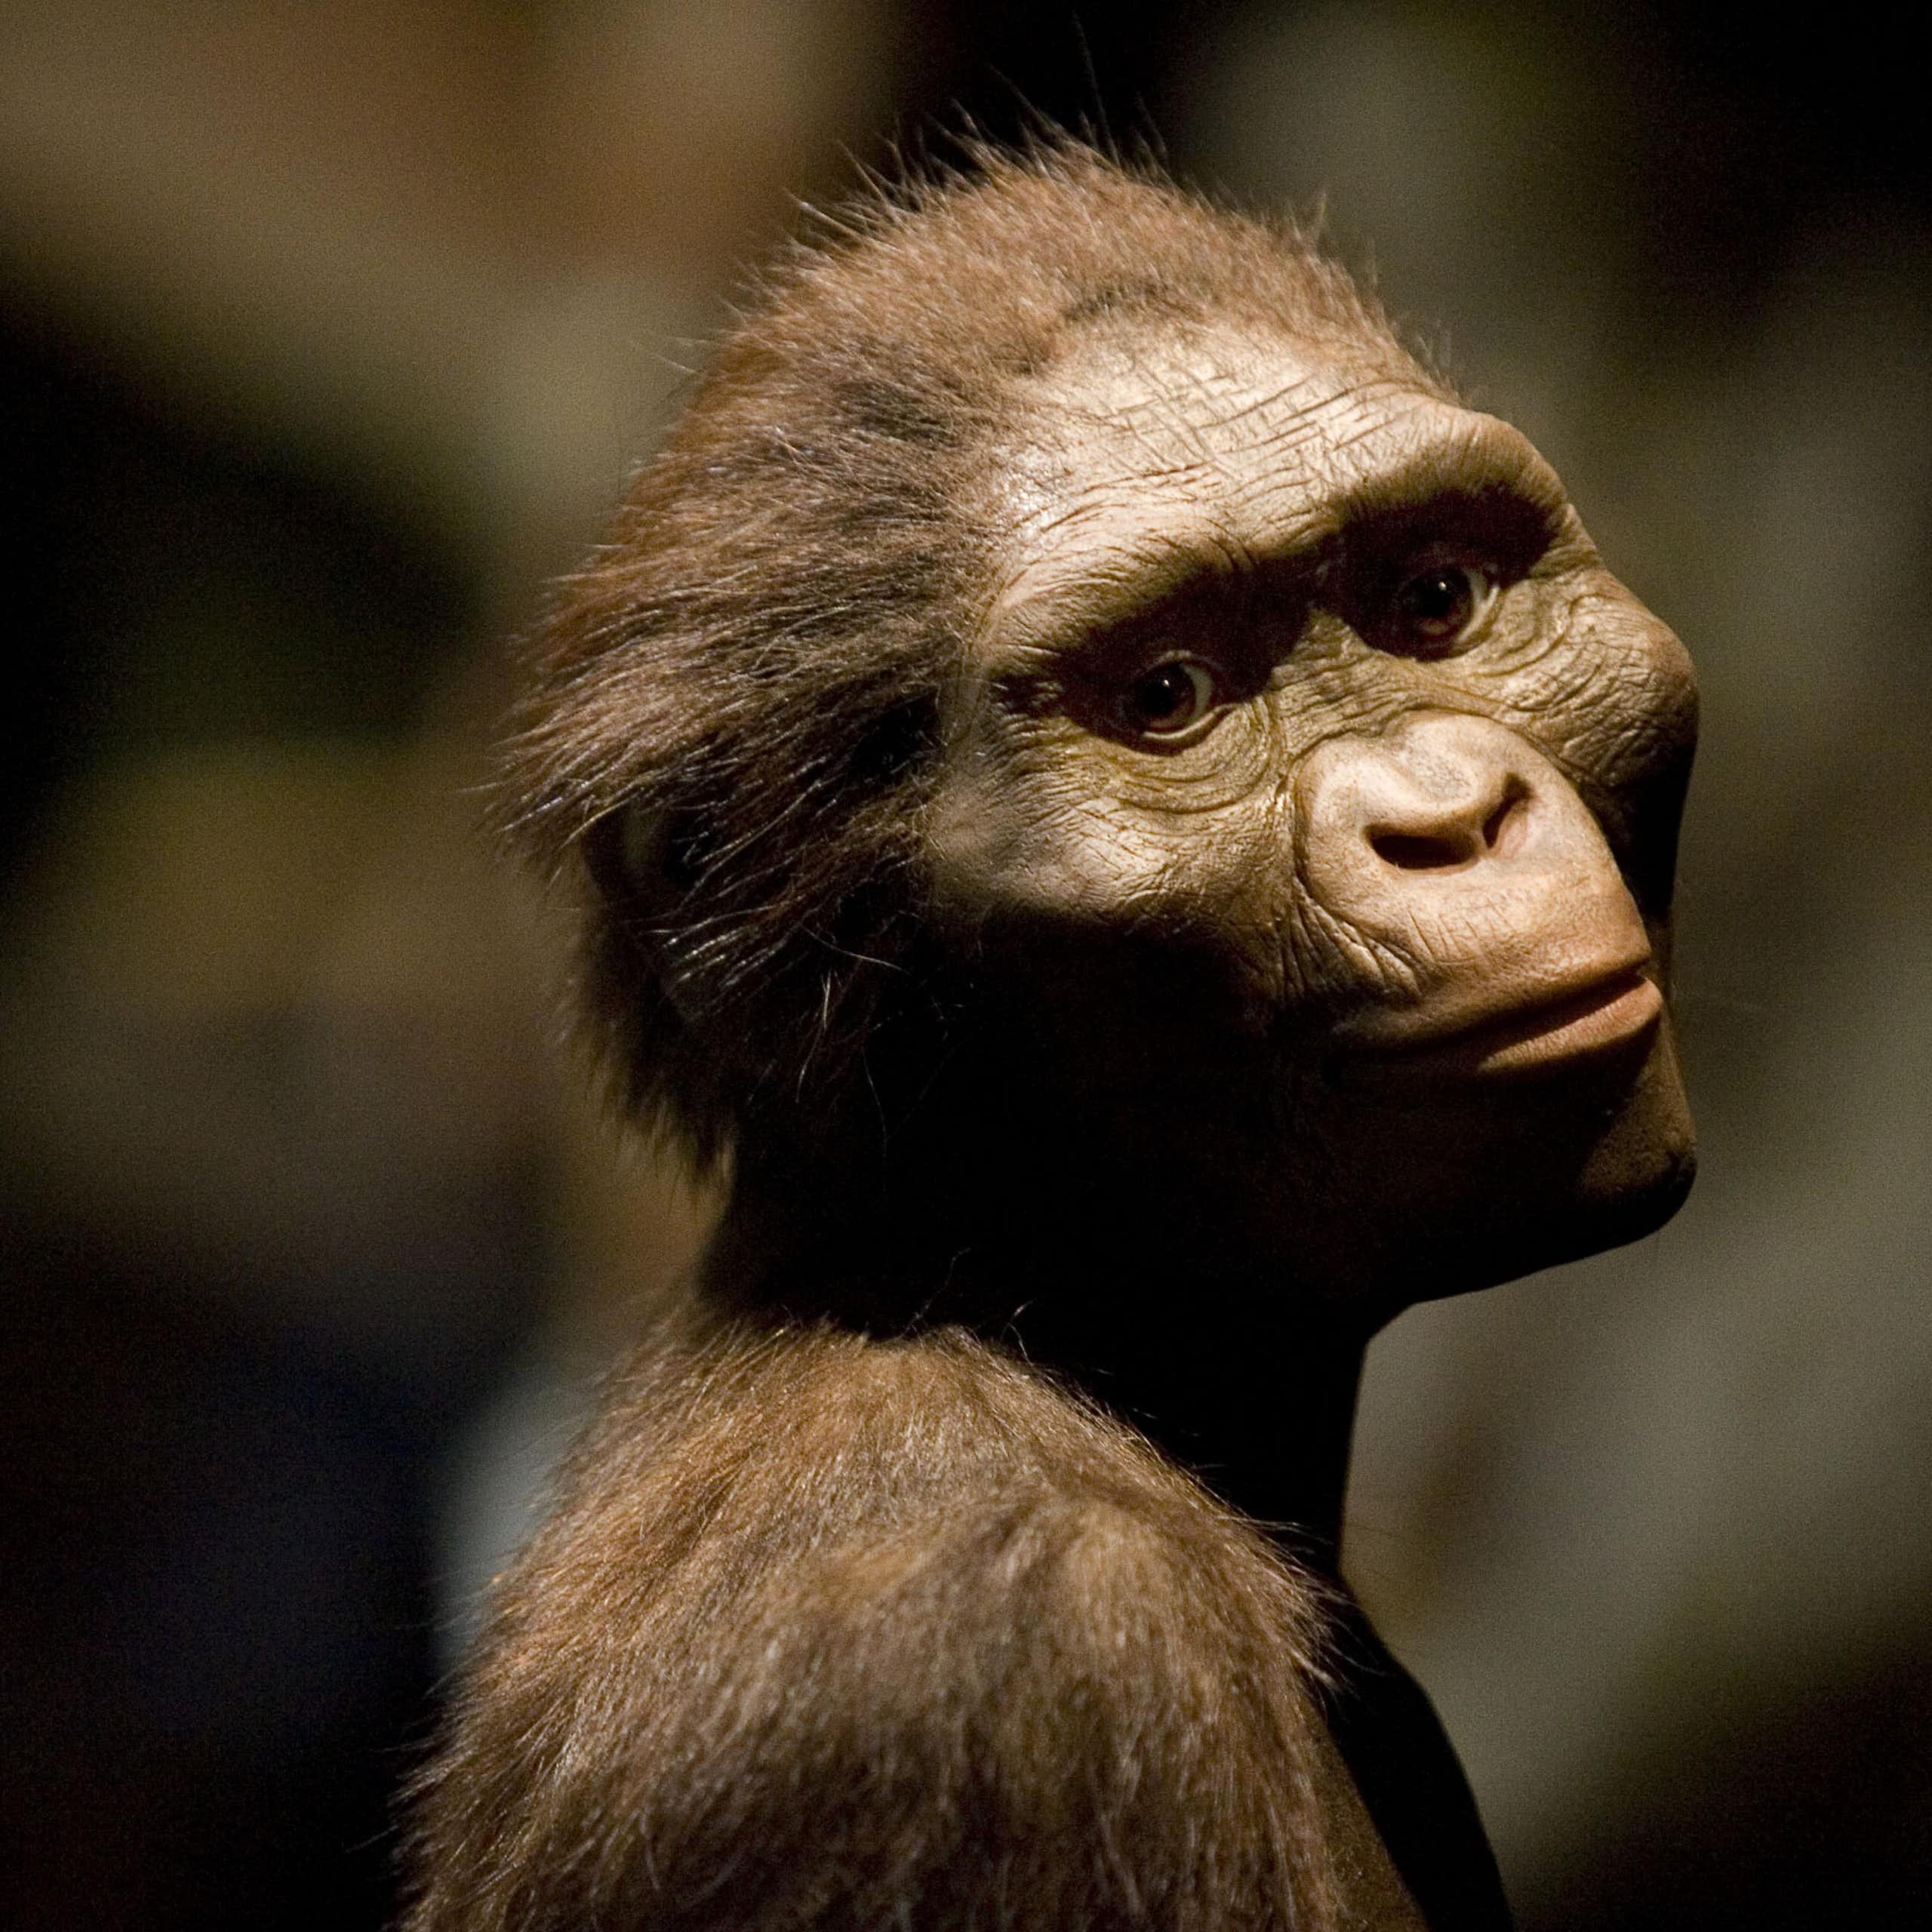 A sculpted head of an ape-like creature with its head angled to the side, gazing off into the distance.